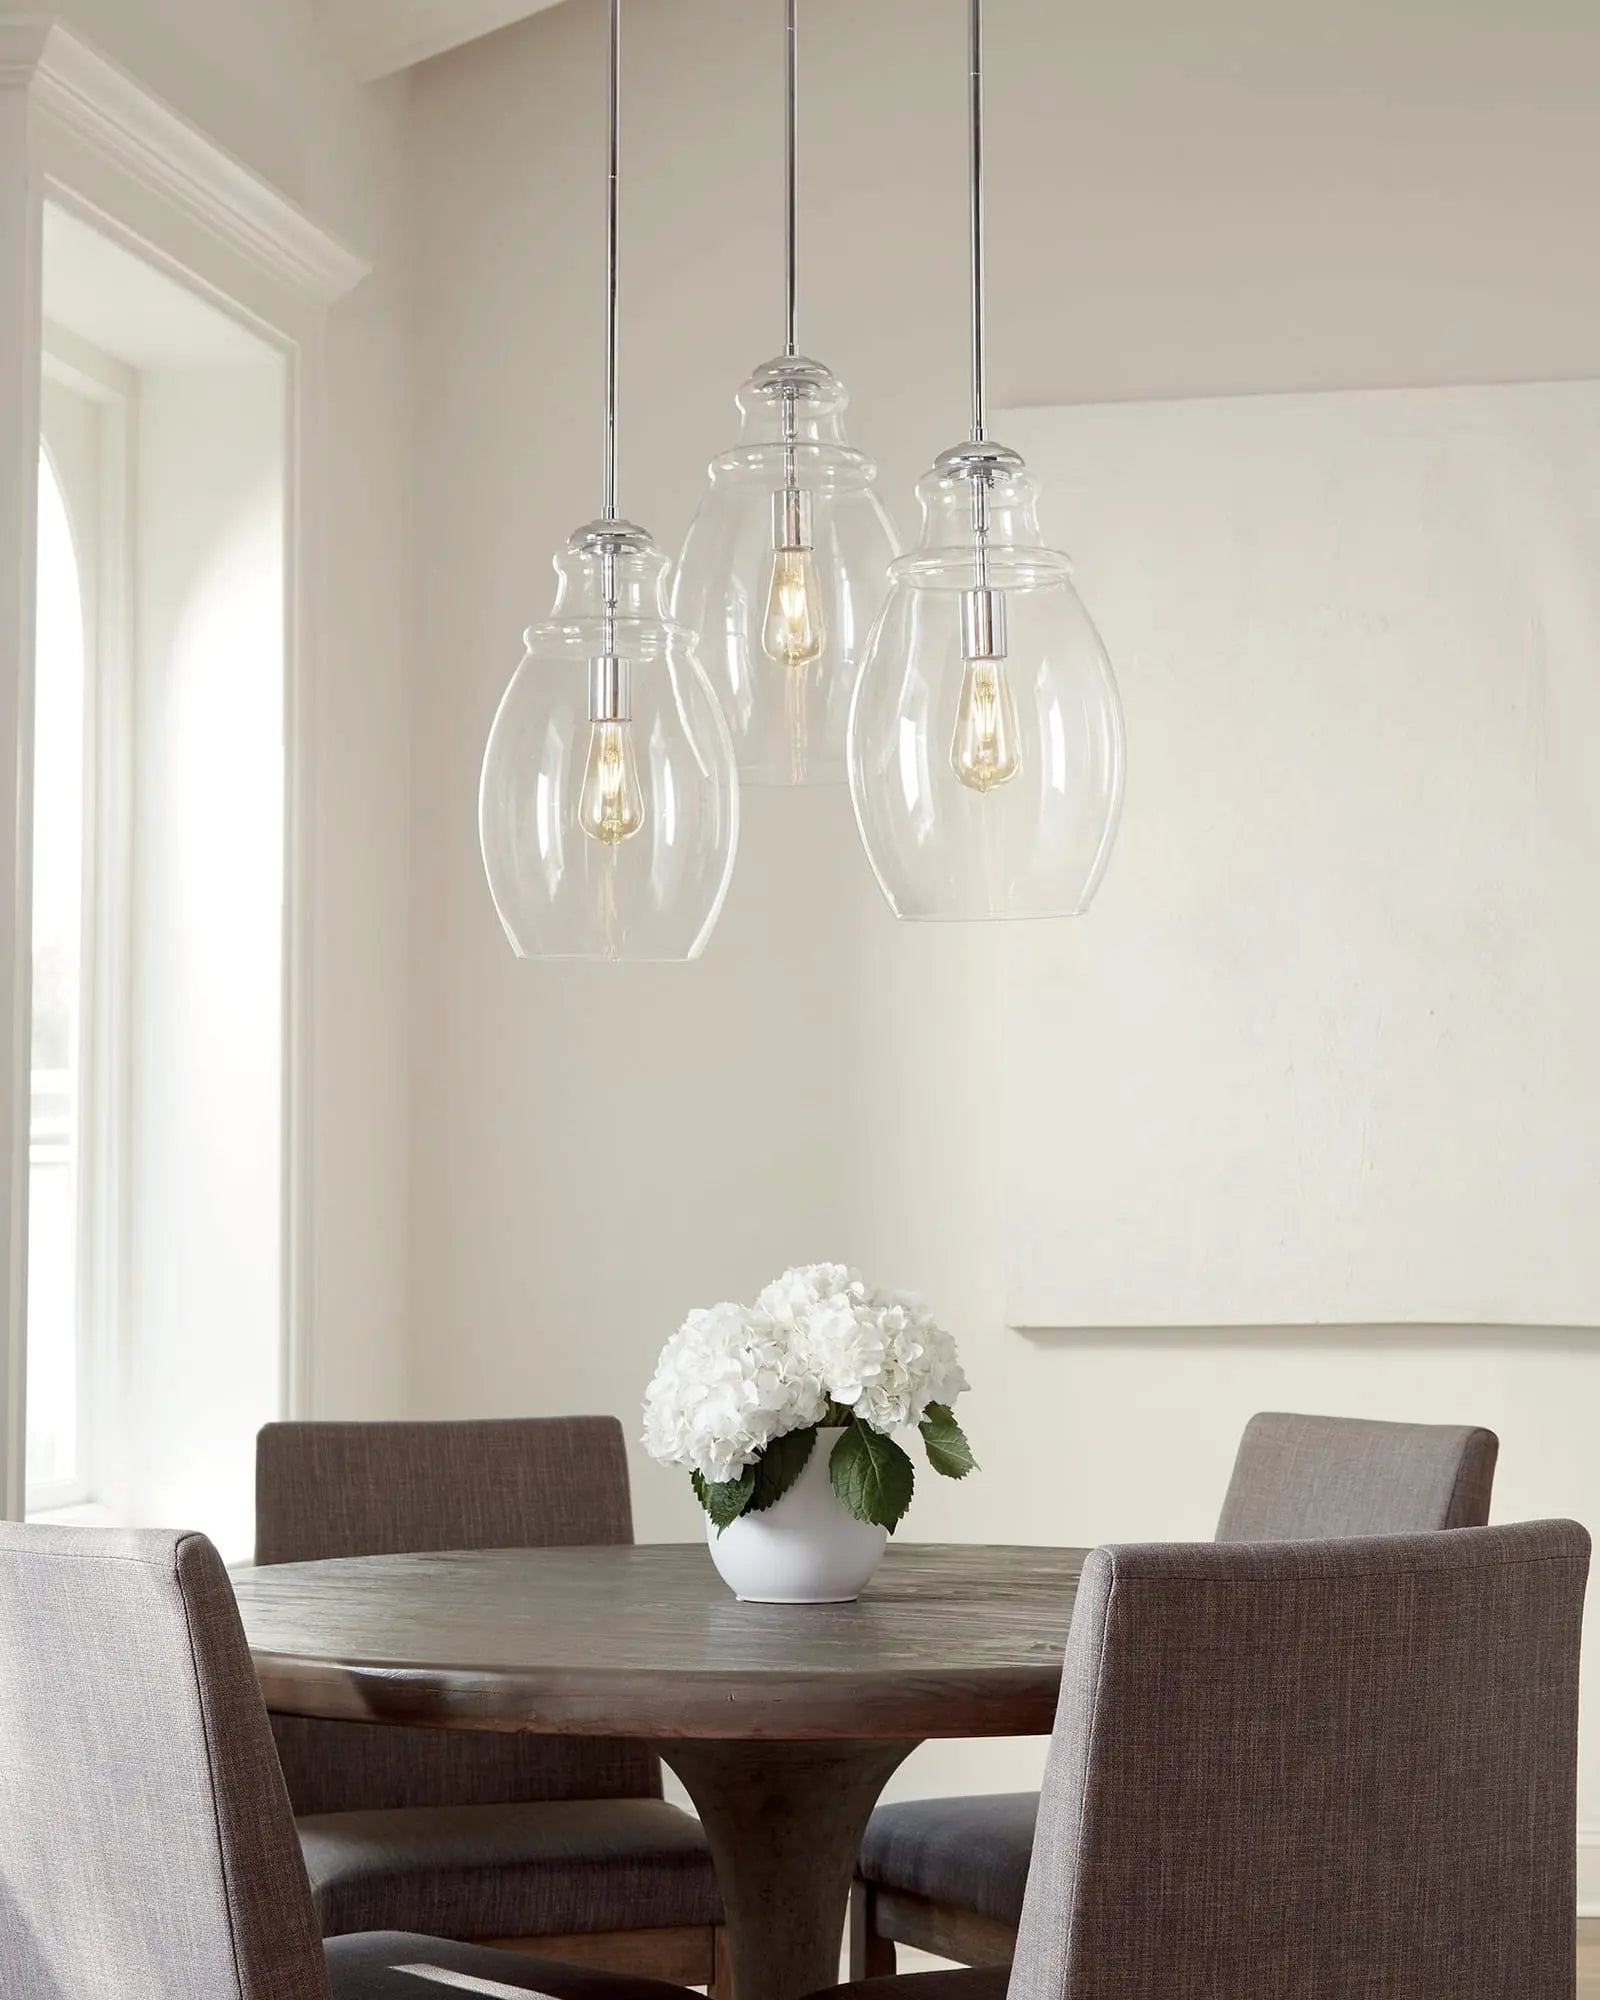 Marino blown glass pendant light cluster above a round table